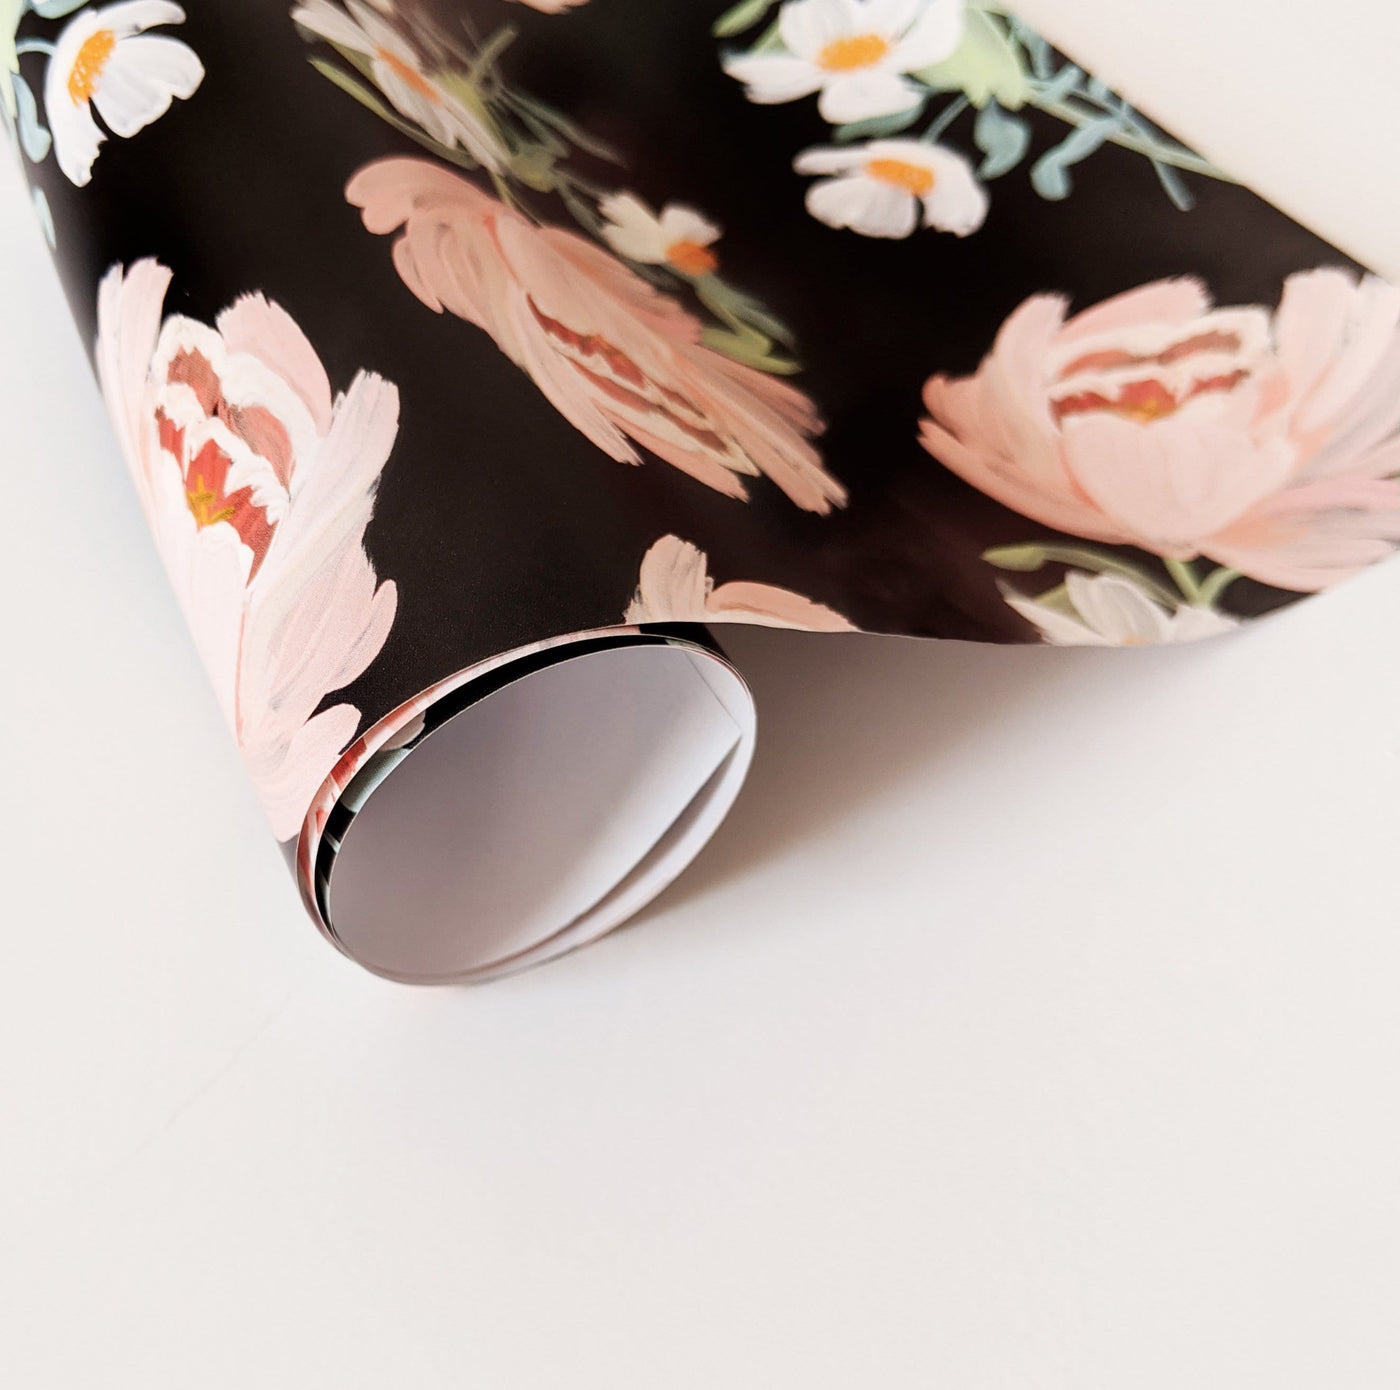 Rolled Illustrated Pink Peony Floral Wrapping Paper On A Black Background - Annie Dornan Smith